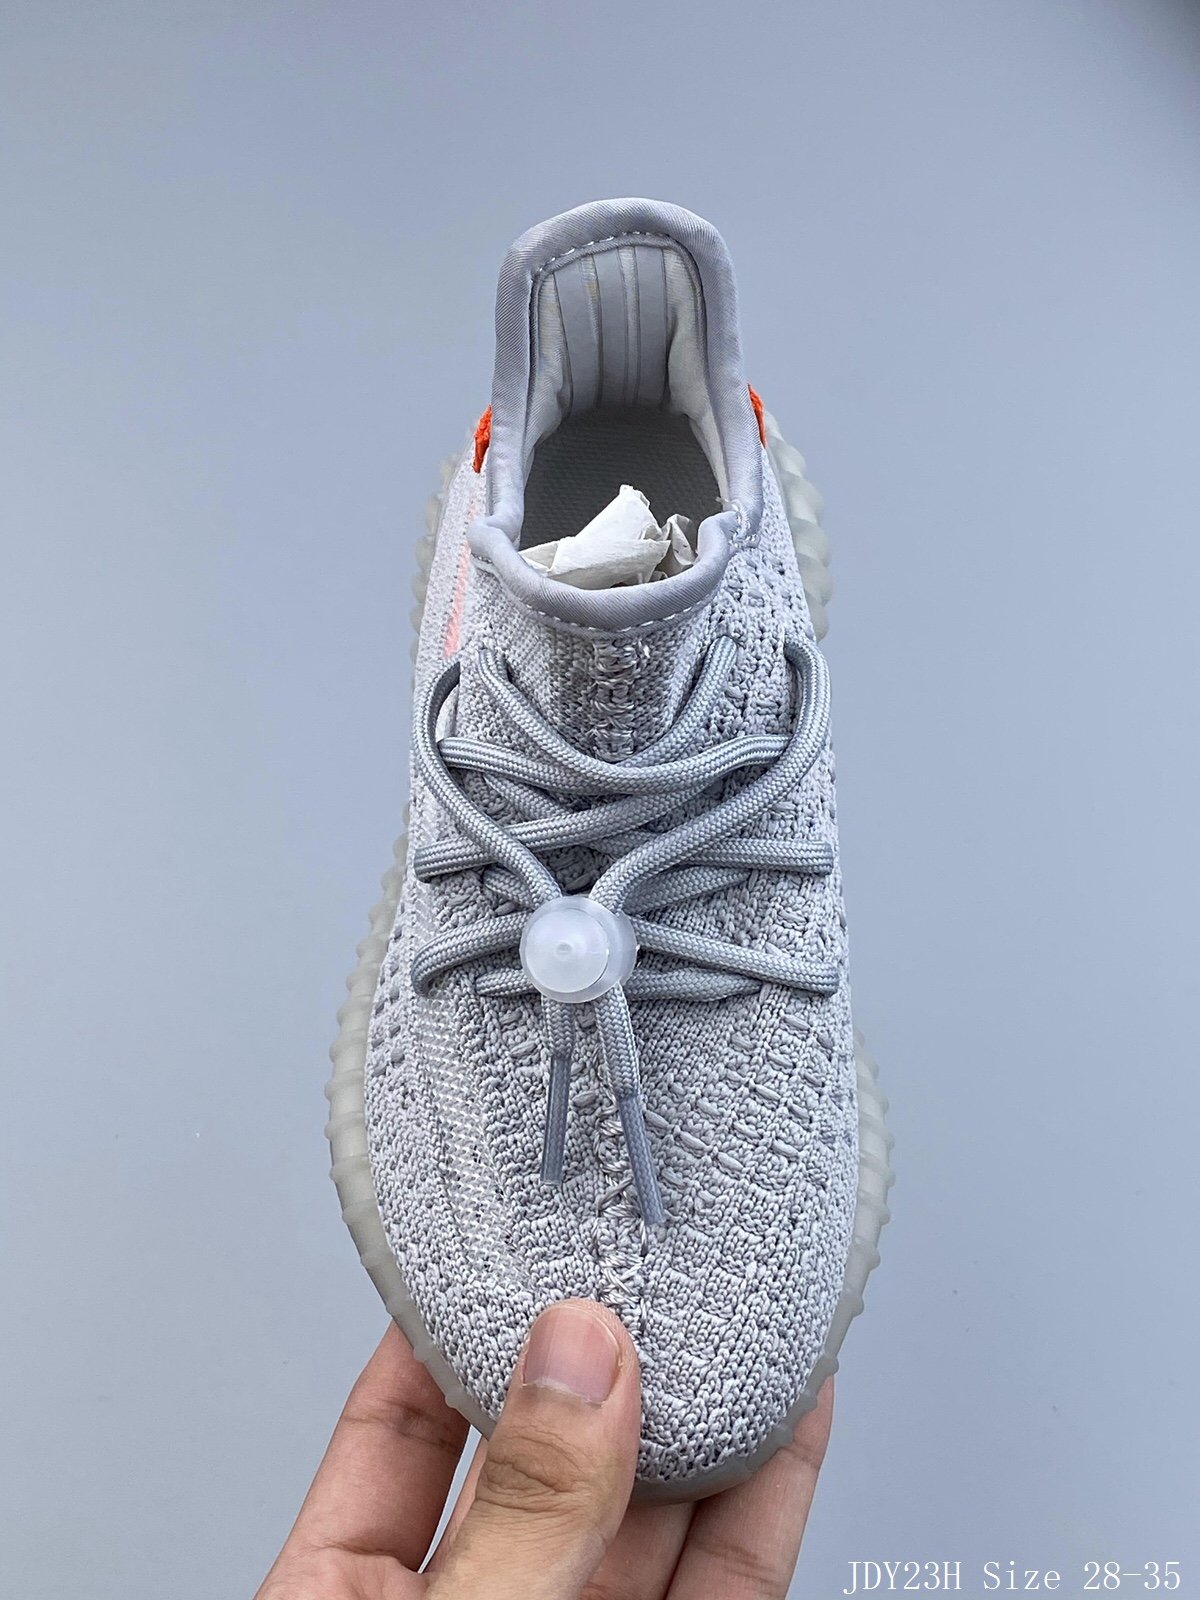 Adidas Yeezy Boost 350 Shoes For Kids # 269986, cheap Shoes for Kids Adidas Shoes For Kid, only $56!